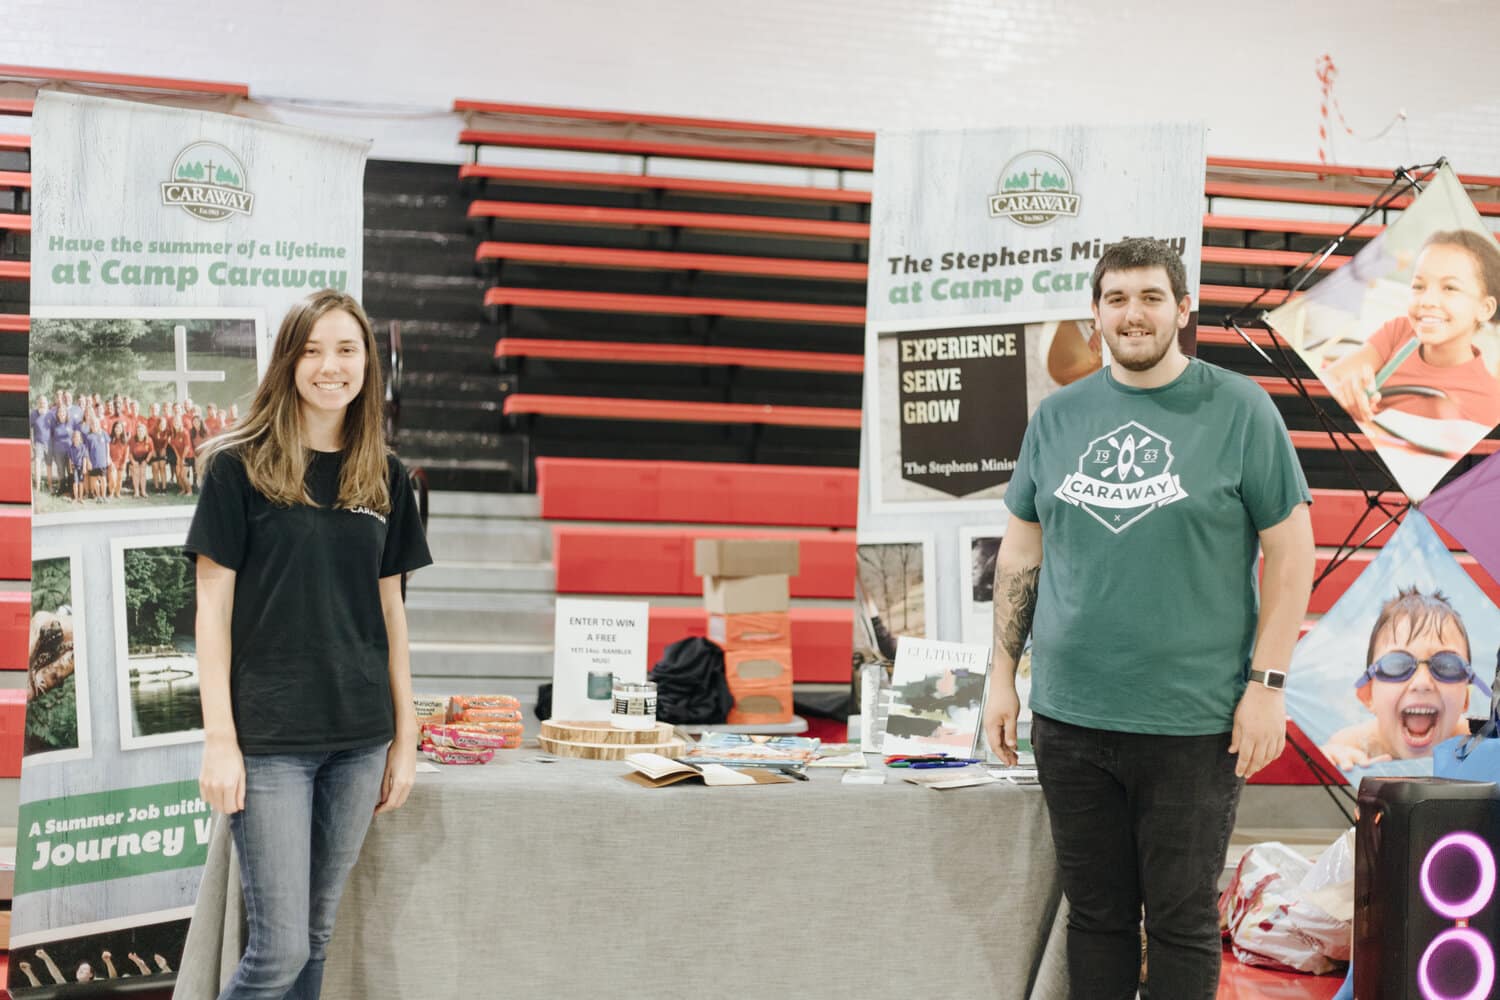 Camp Caraway representatives set up a table at the camp fair. They offered students not only ramen noodles, but also an opportunity for a summer job working with youth students. Who can beat that combination?